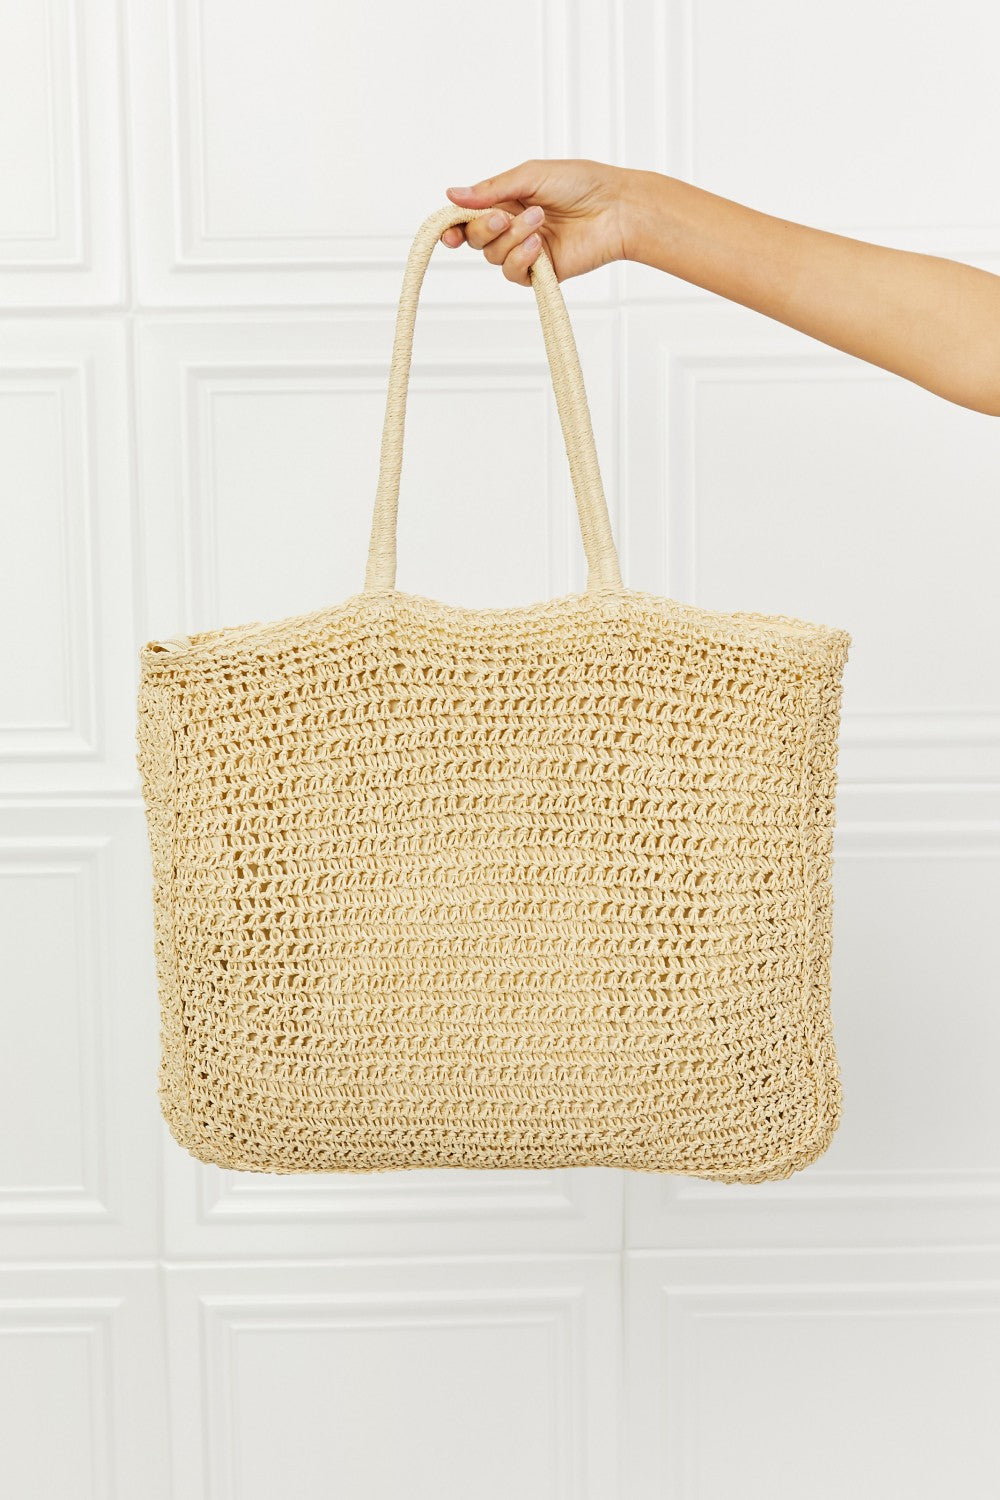 Fame Off The Coast Straw Tote Bag free shipping -Oh Em Gee Boutique